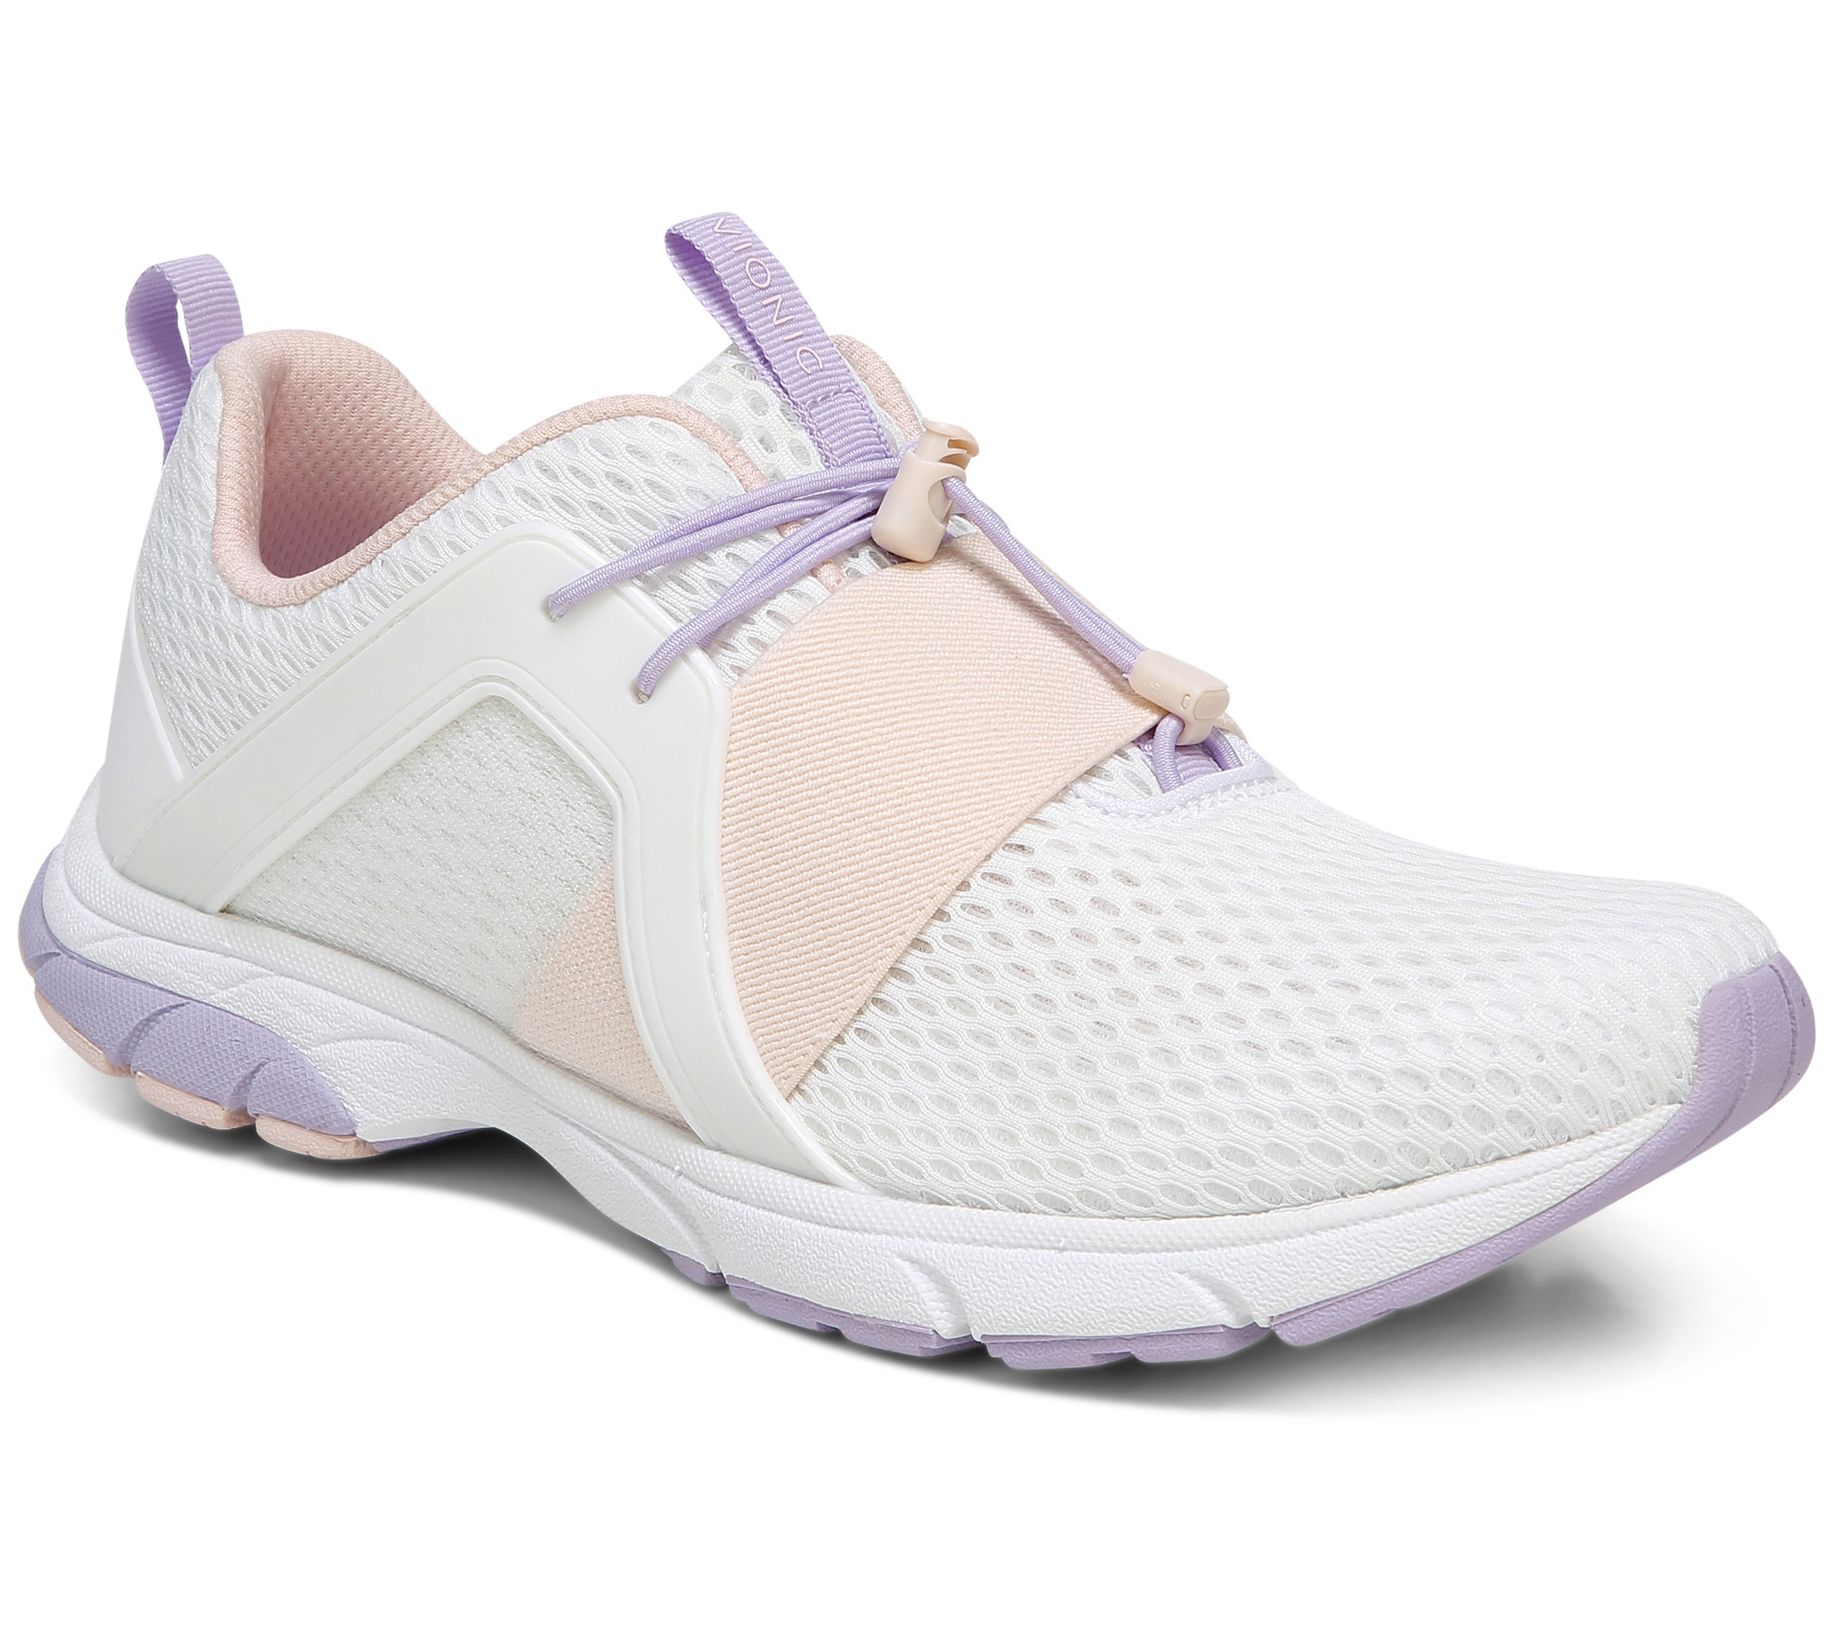 Vionic Mesh Sneakers with Bungee Closure - Berlin QVC.com